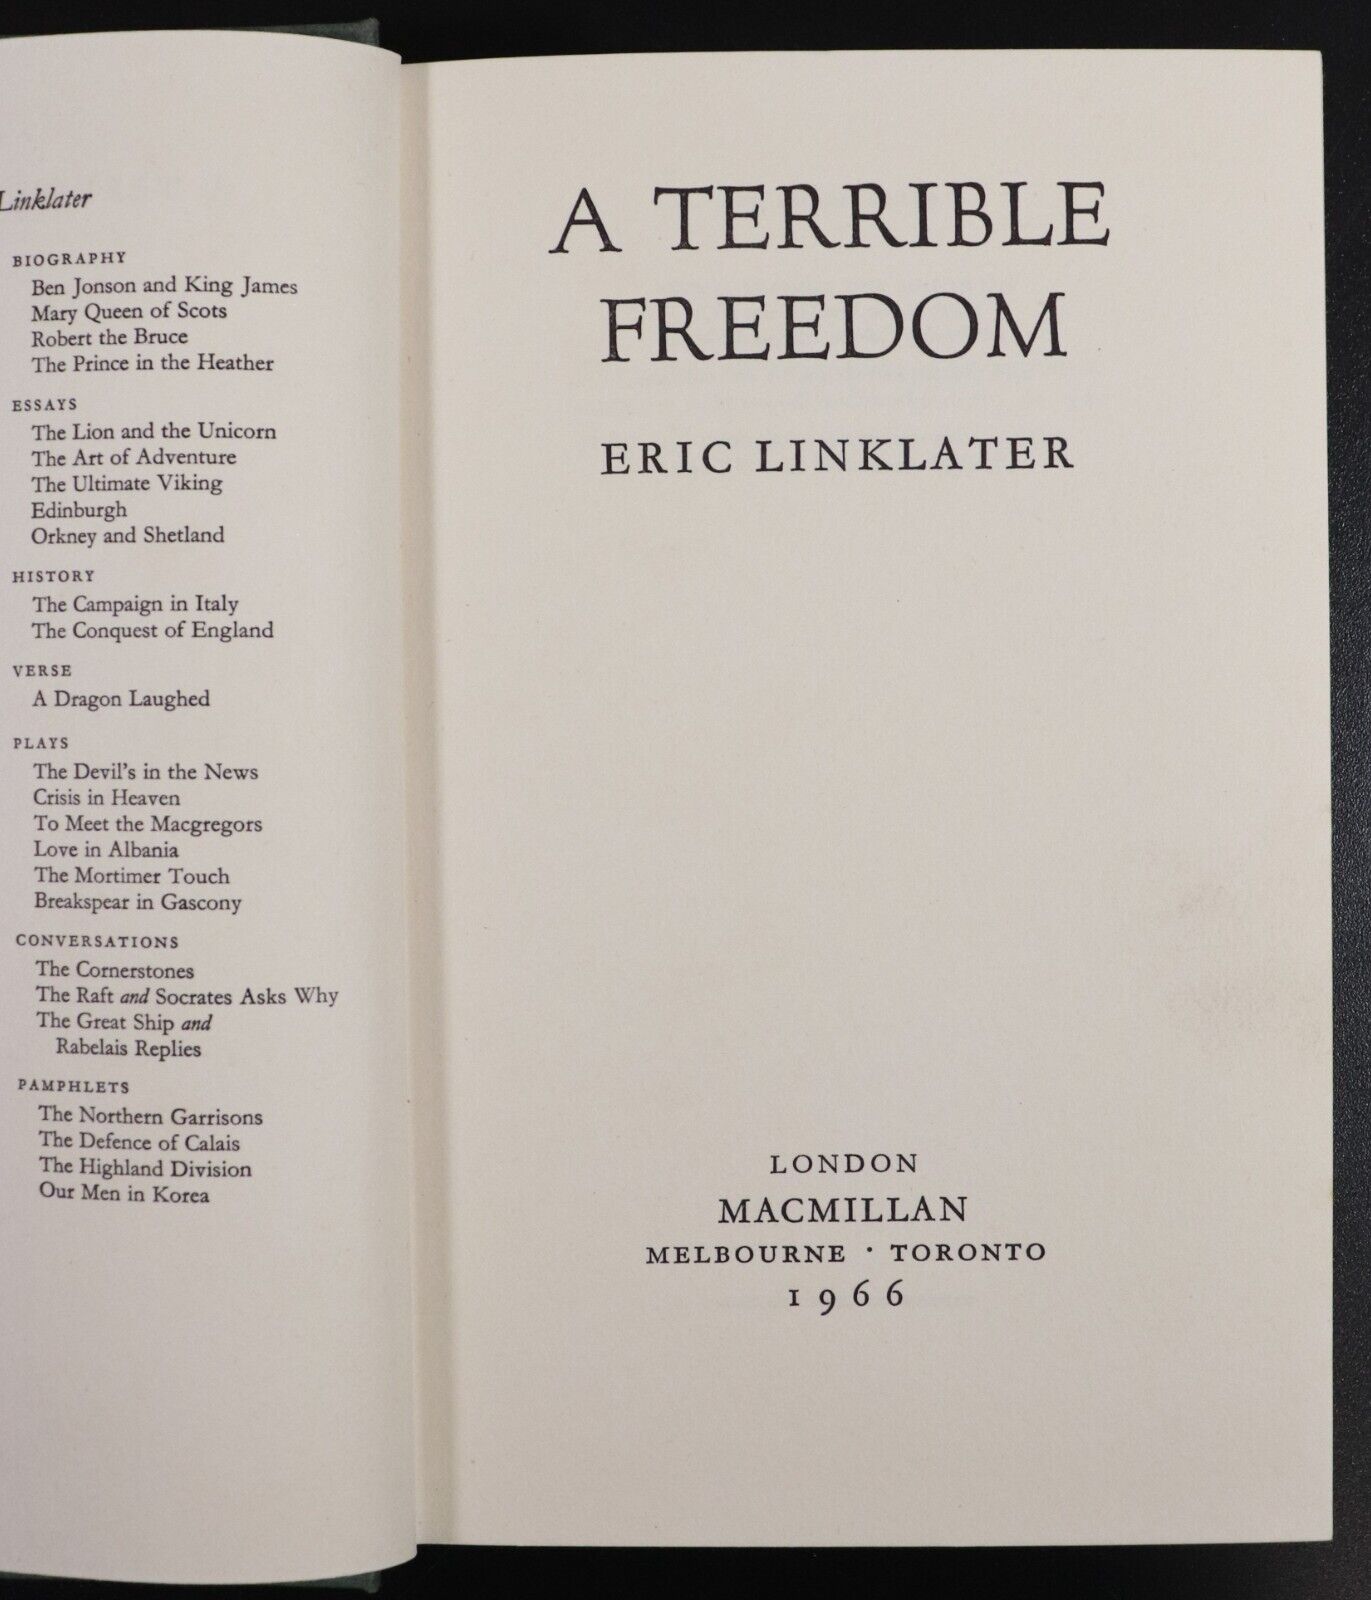 1966 A Terrible Freedom by Eric Linklater Vintage Fiction Book 1st Edition - 0